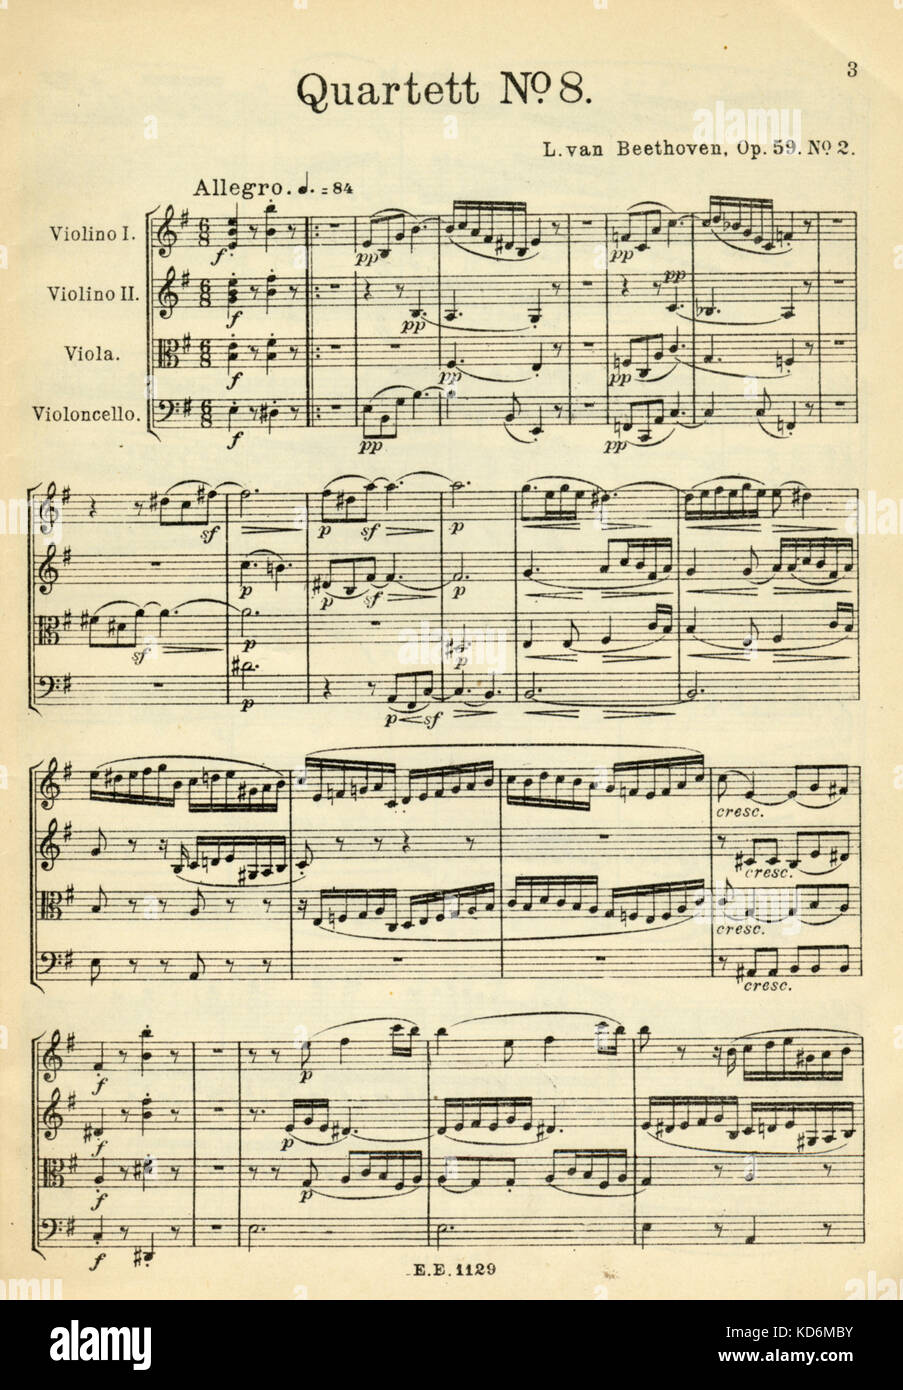 Ludwig van Beethoven - opening page of score for String Quartet No 8 in E  Minor, Opus 59 no 2. German composer, 17 December 1770 - 26 March 1827. For  2 violins,